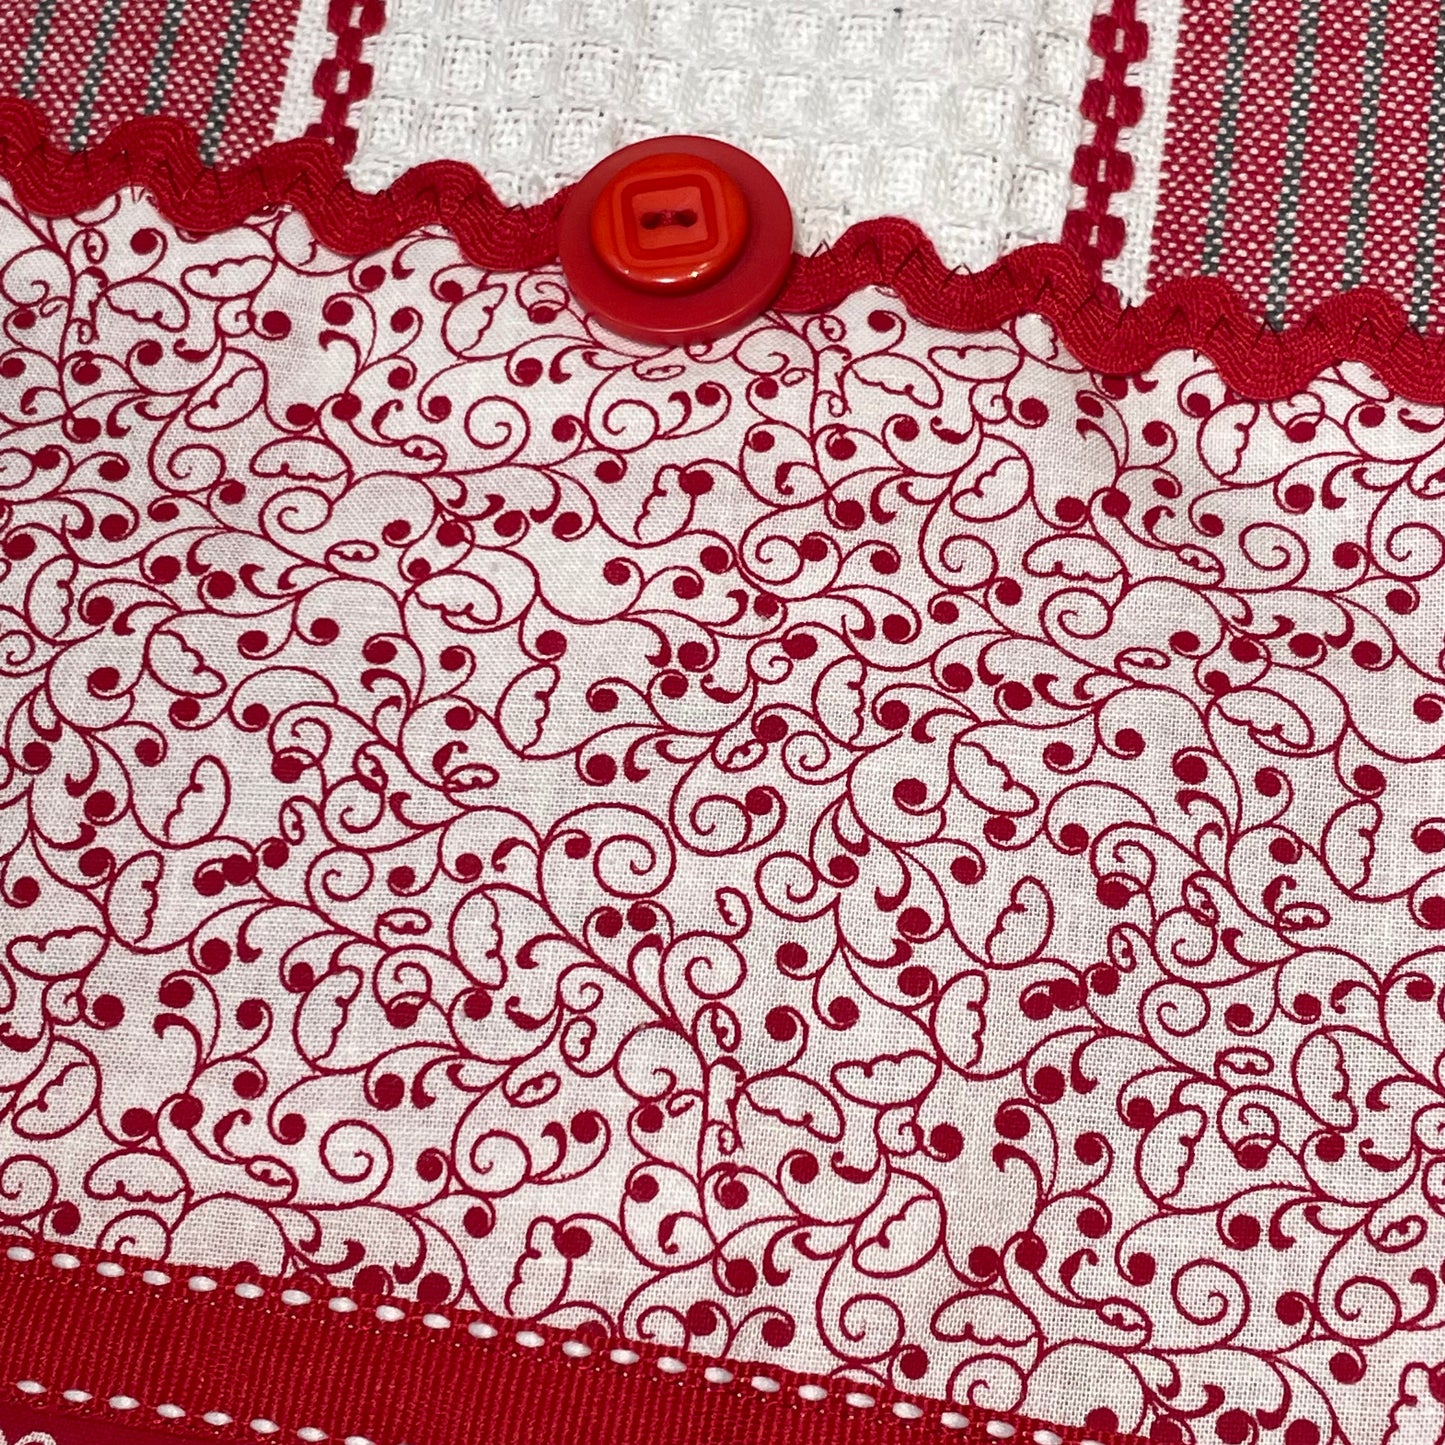 Red and White Kitchen Dish Towel with quilting cotton accents. Featuring Embroidery, Ric Rac and and Button Details. Part of a mix and match collection. Browse the entire line of coordinated products exclusive to Home Stitchery Decor. And be sure to watch the Home Stitchery Decor YouTube Channel.